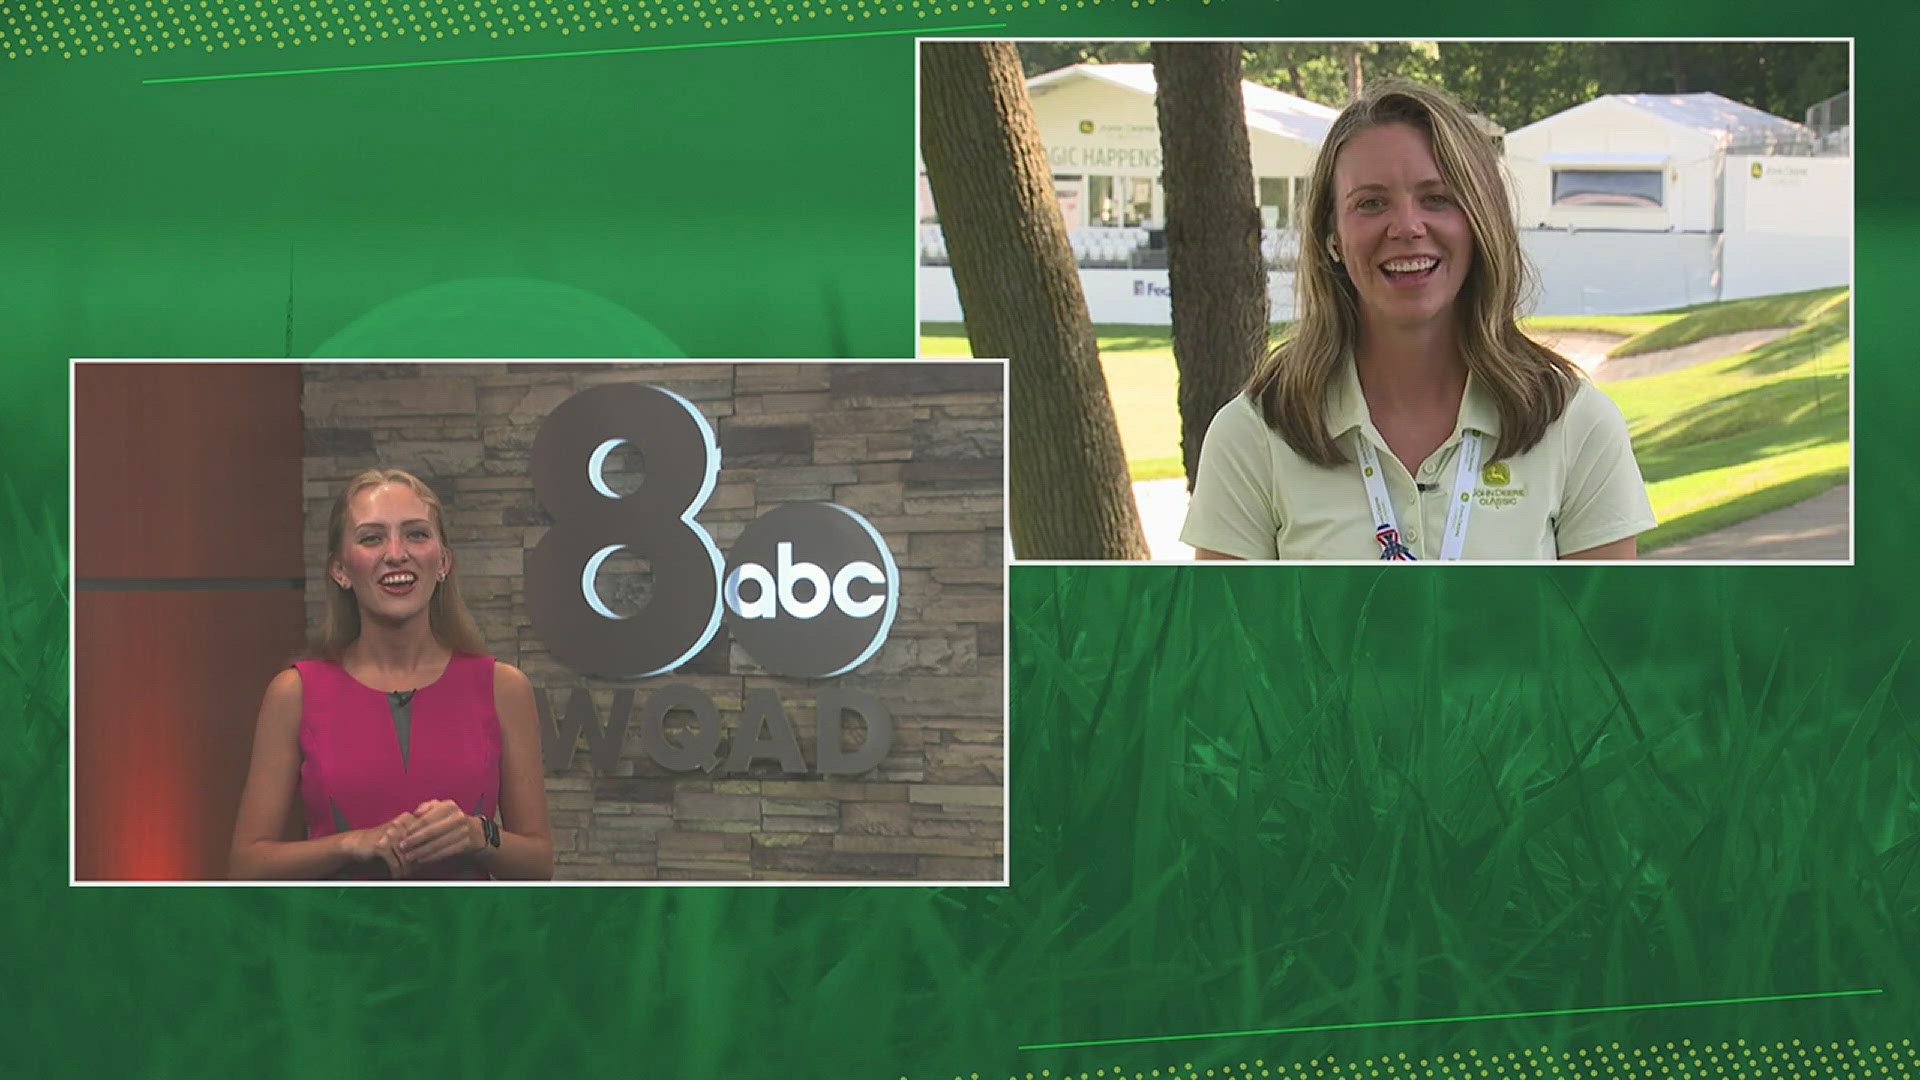 News 8's Shelby Kluver spoke with assistant tournament director Ashley Hansen about what people attending the JDC should prepare for.